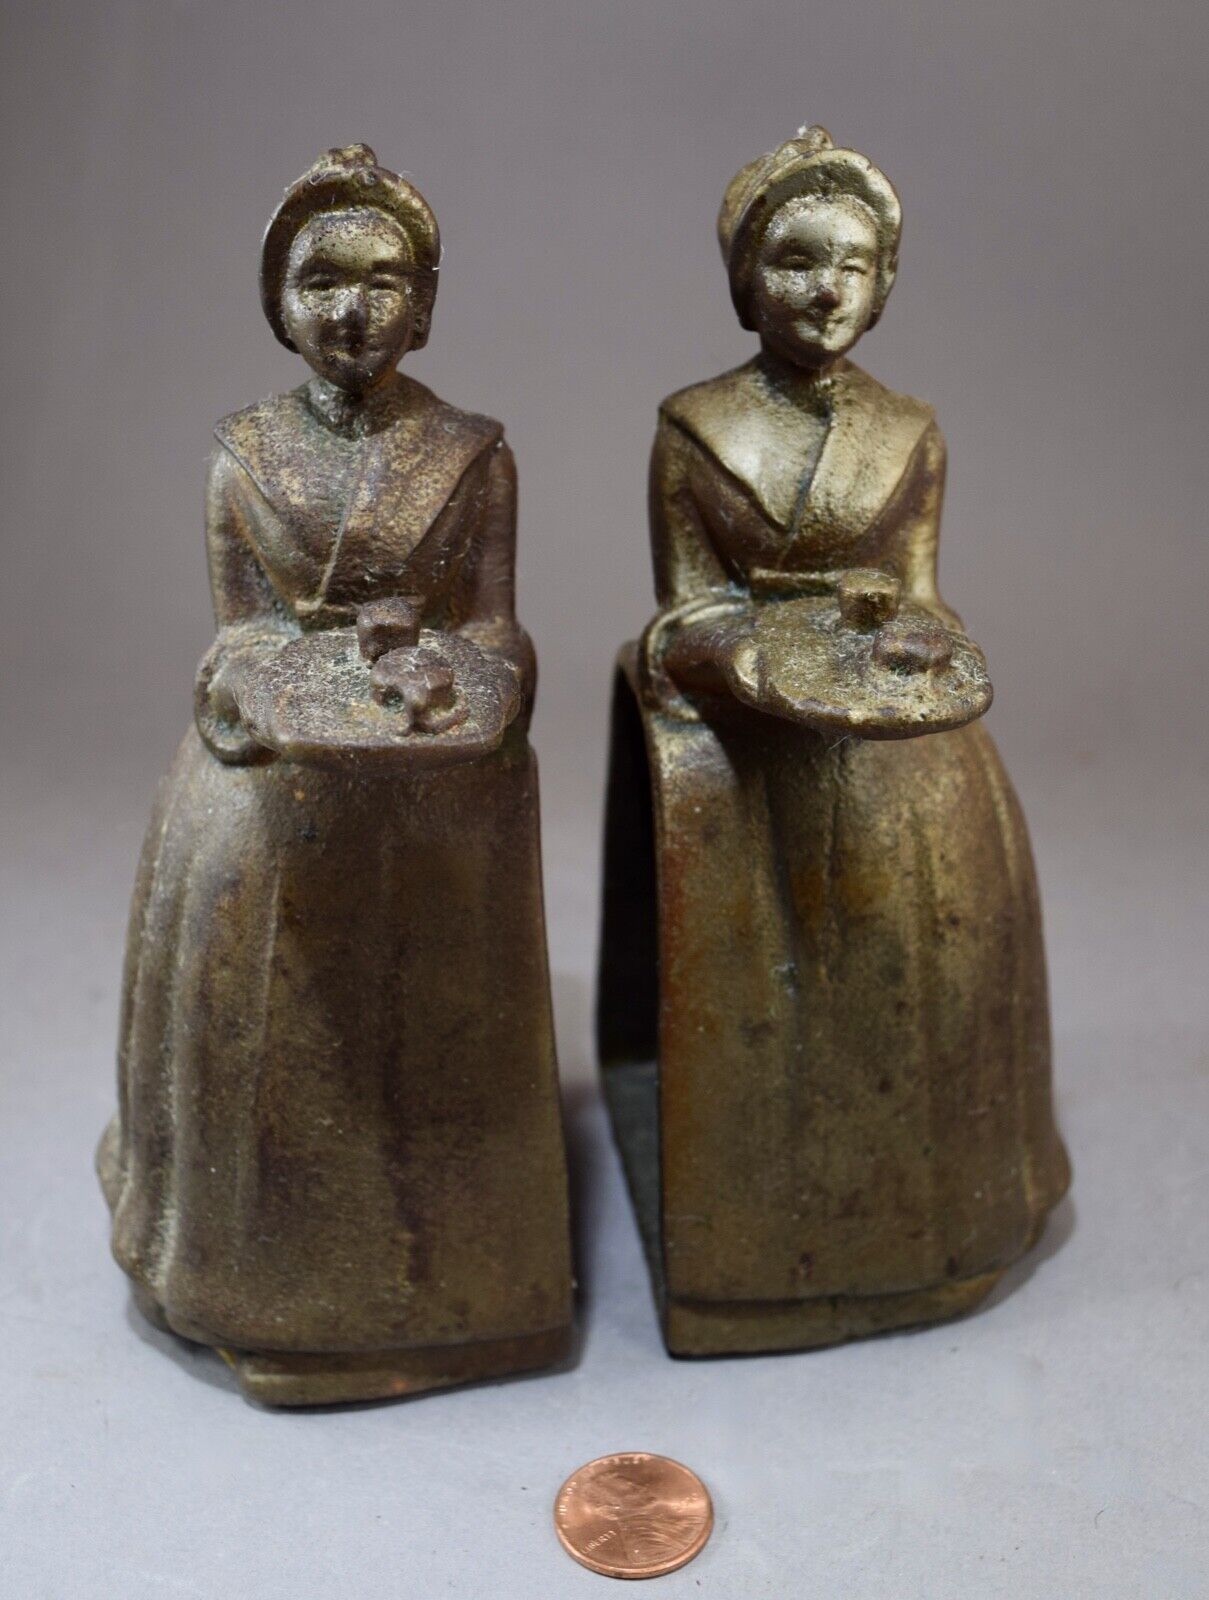 ANTIQUE BAKER\'S CHOCOLATE COMPANY LADY TRAY CAST IRON STATUE SCULPTURE BOOKENDS